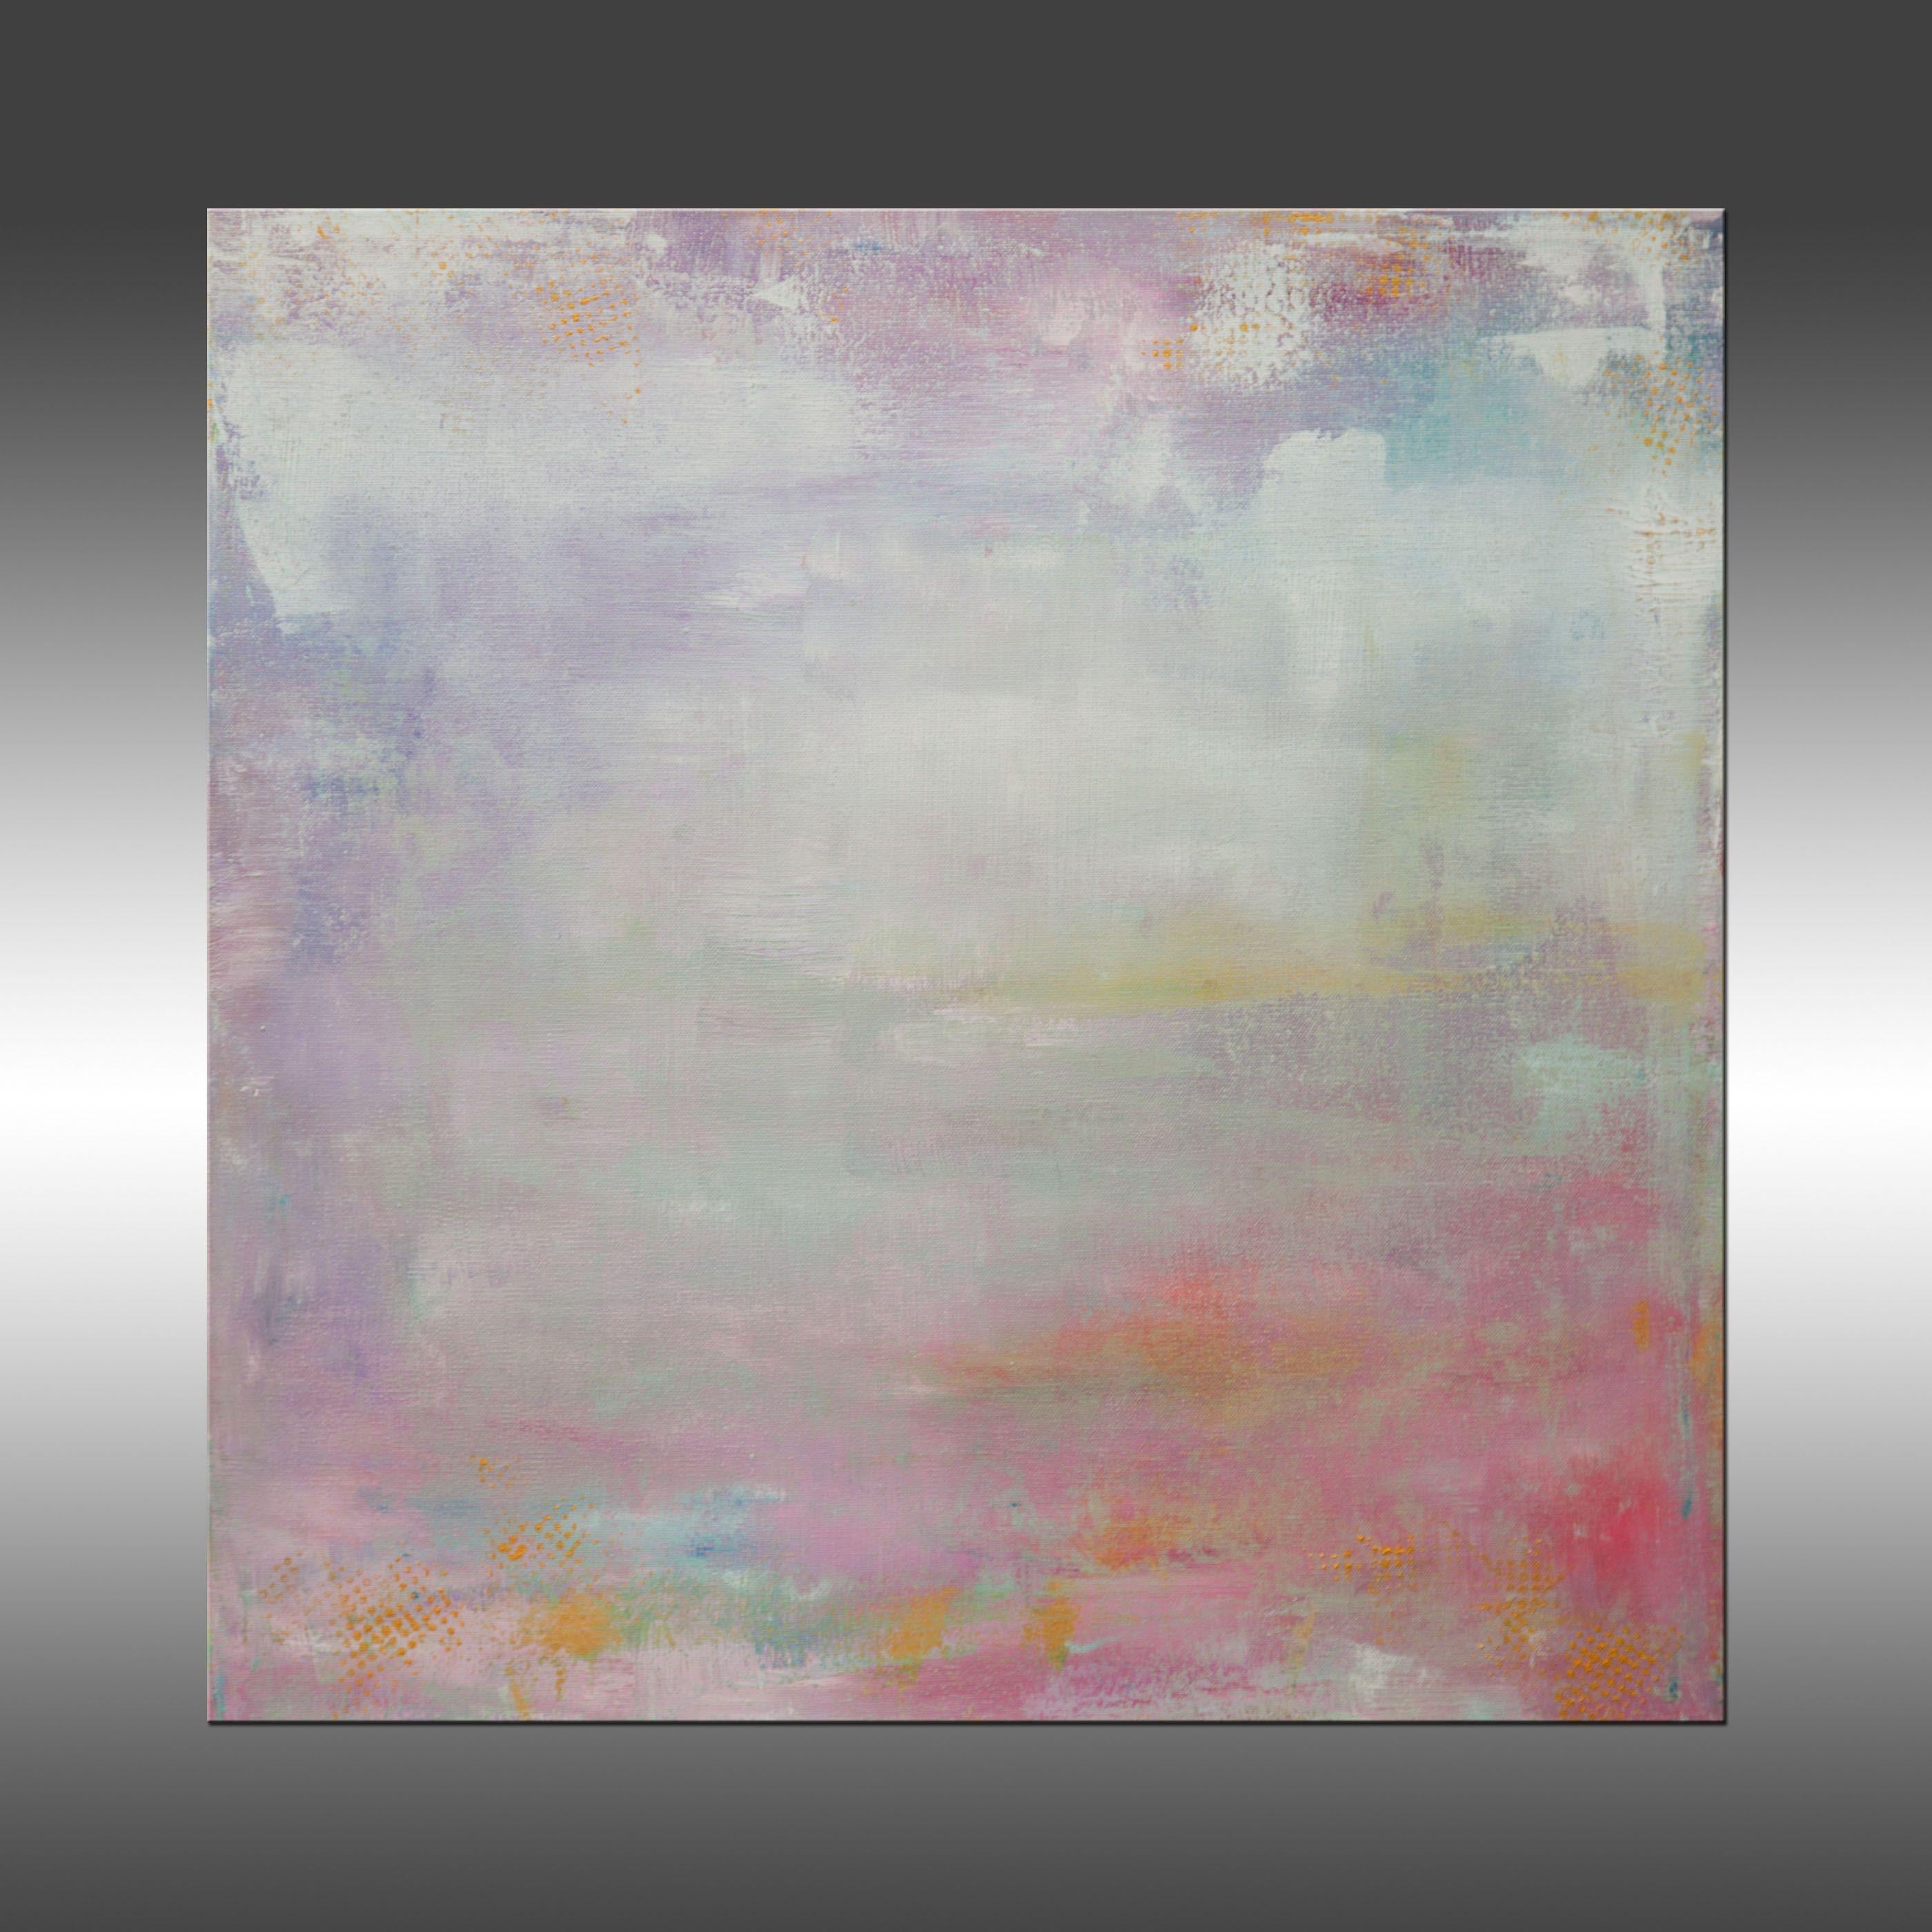 Subtle Expression 2 is an original painting, created with acrylic paint on gallery-wrapped canvas. It has a width of 24 inches and a height of 24 inches with a depth of 1.5 inches (24x24x1.5).    The colors used in the painting are white, pink,